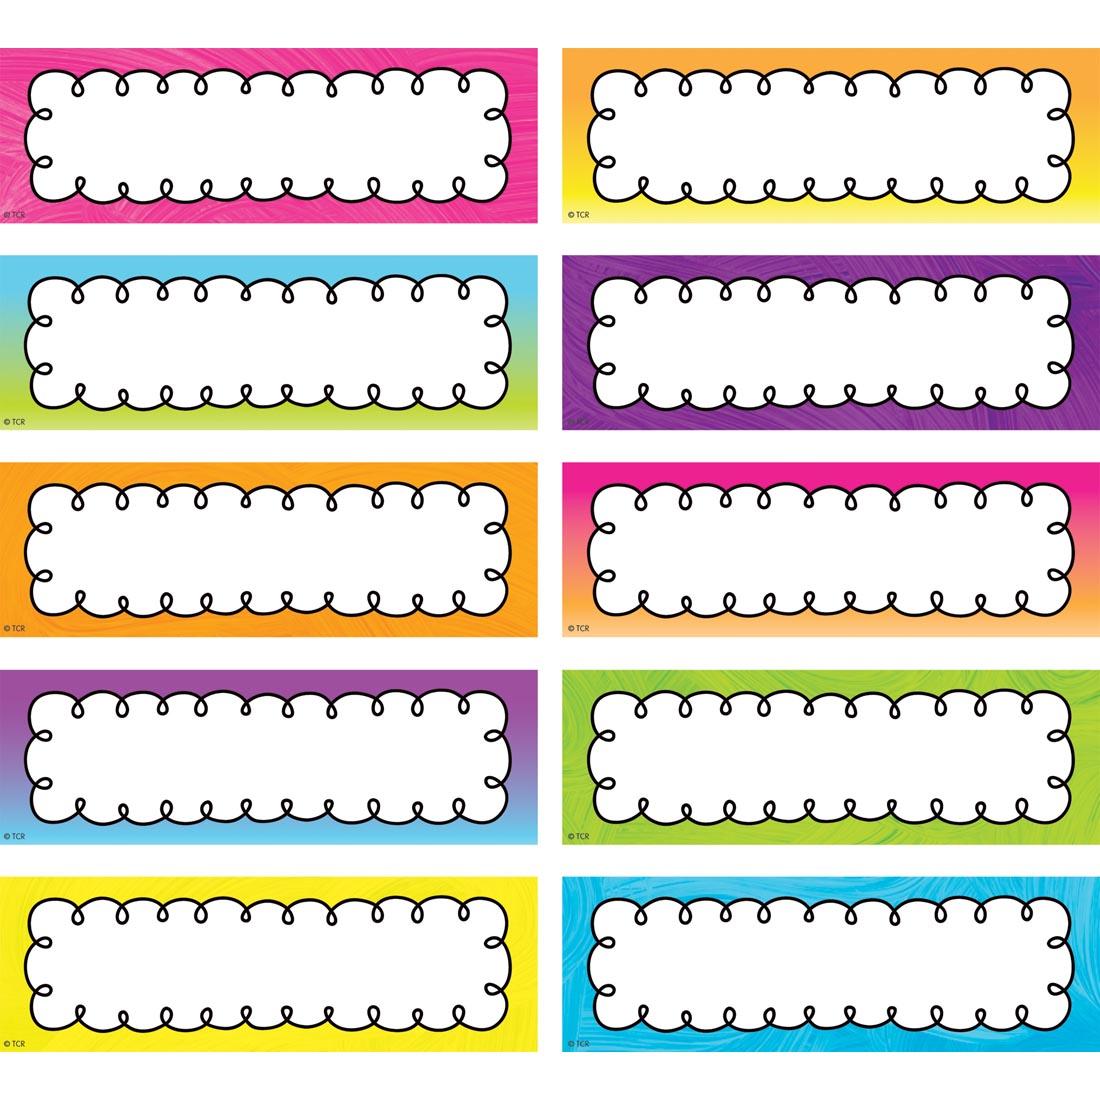 Magnetic Labels from the Brights 4Ever collection by Teacher Created Resources